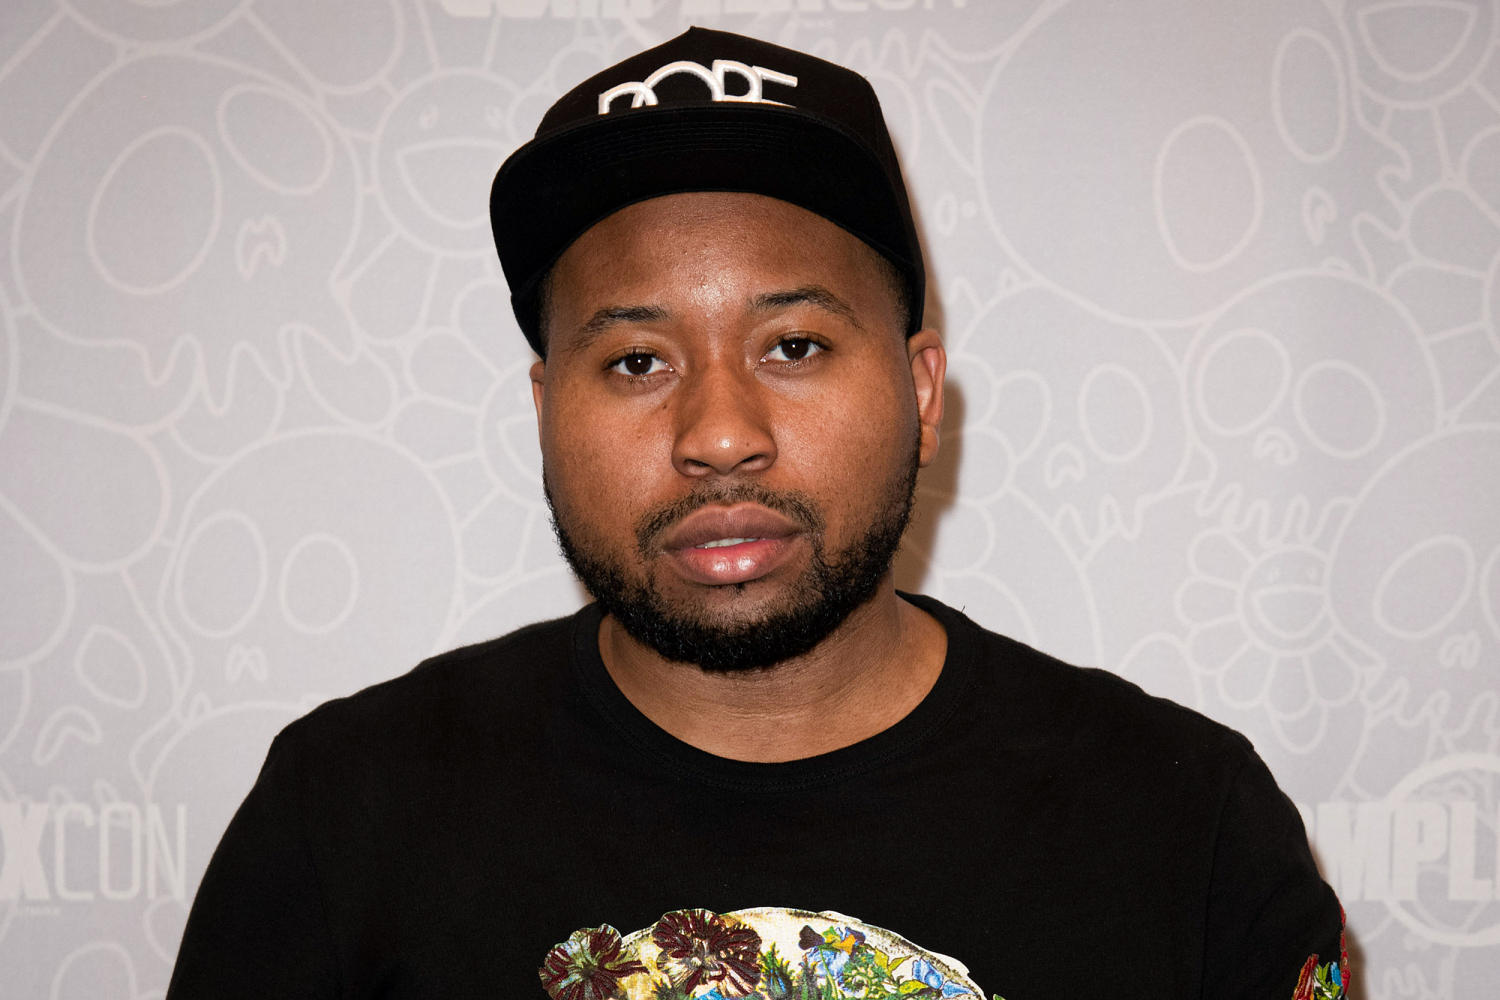 Facing a lawsuit alleging rape, MAGA podcaster DJ Akademiks threatens to expose others